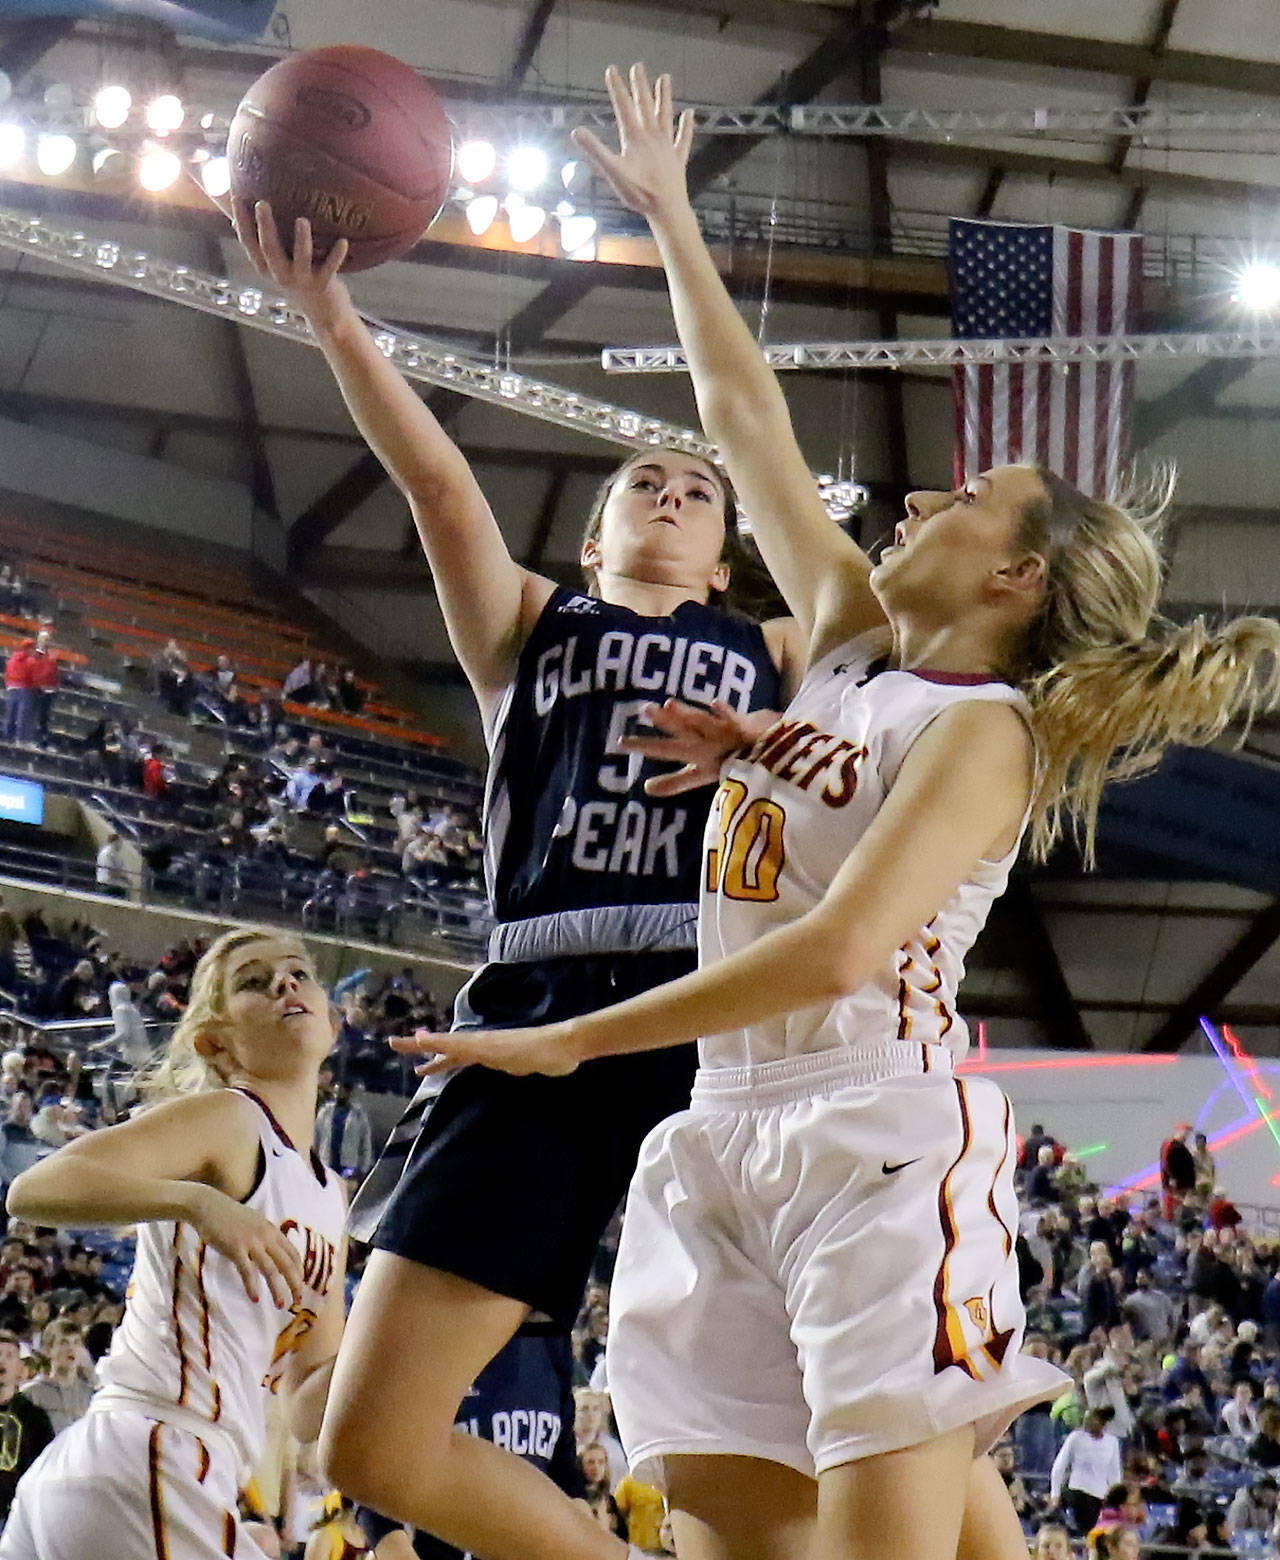 Glacier Peak’s Samantha Fatkin attempts a shot with Moses Lake’s Jessica Olson defending during a 4A state tournament semifinal game on March 3, 2017, at the Tacoma Dome. Glacier Peak won 55-51 to advance to the state finals. (Kevin Clark / The Herald)